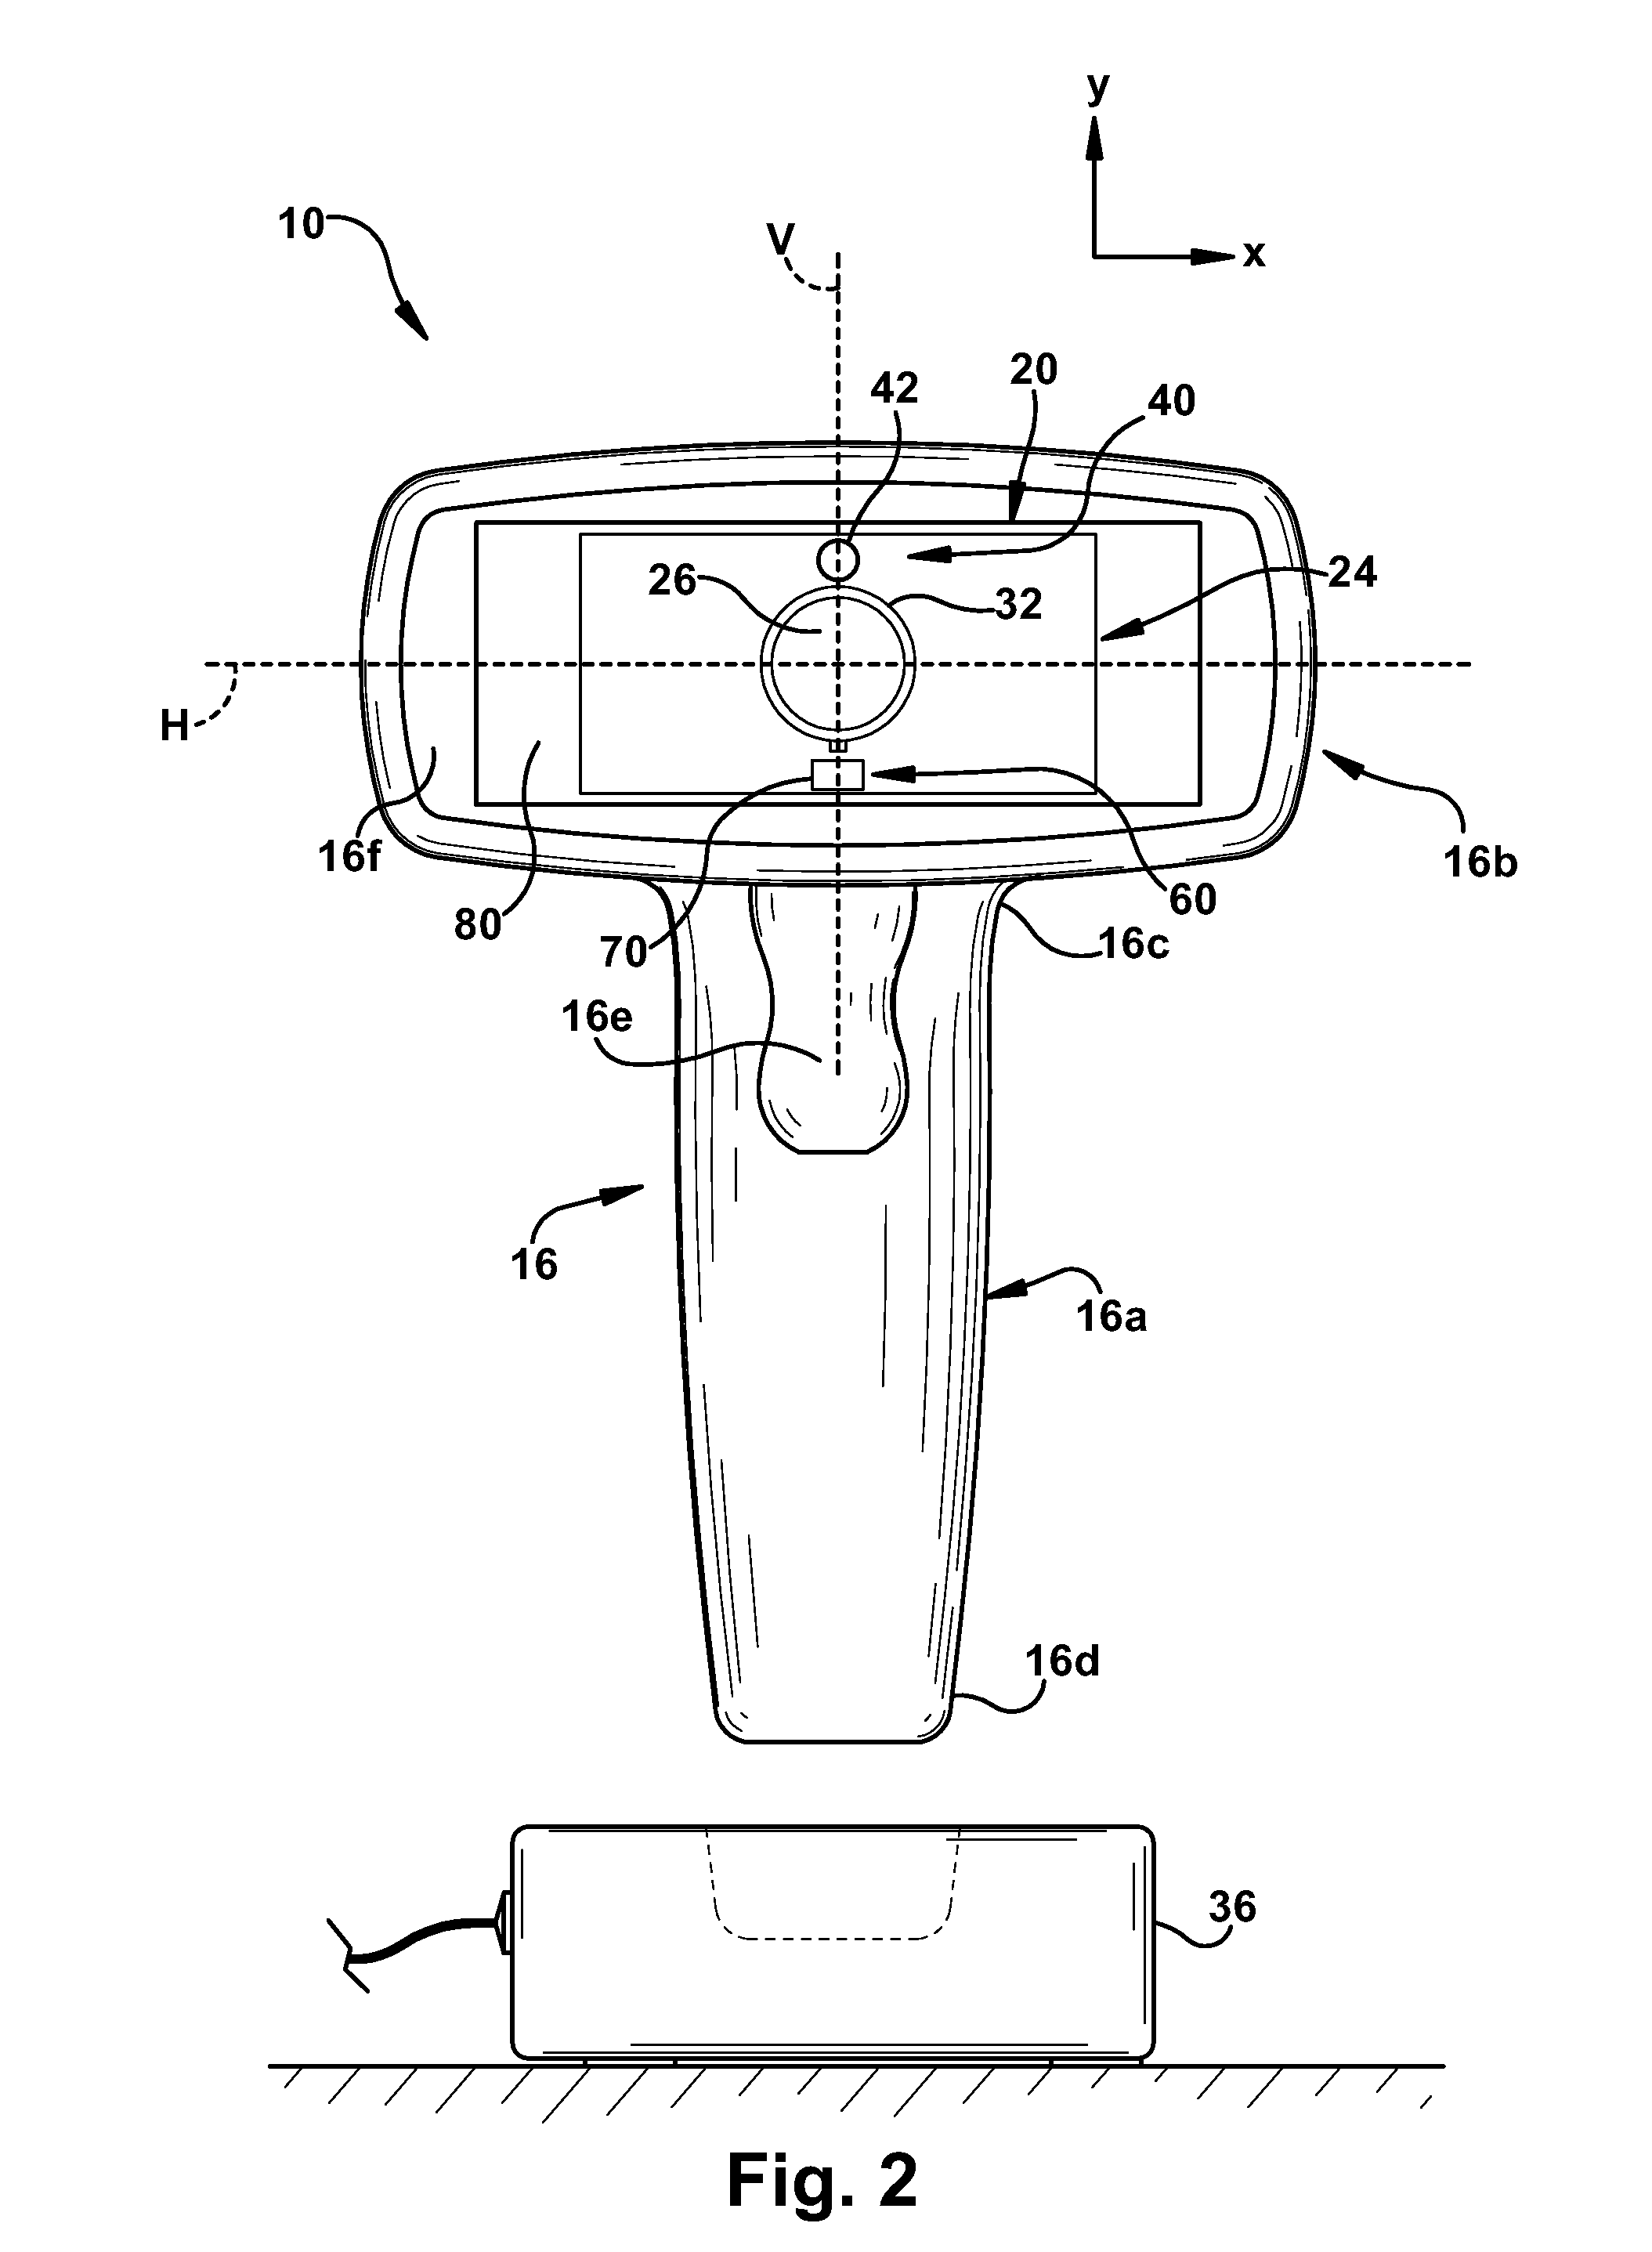 Selectable Aiming Pattern for an Imaging-Based Bar Code Reader